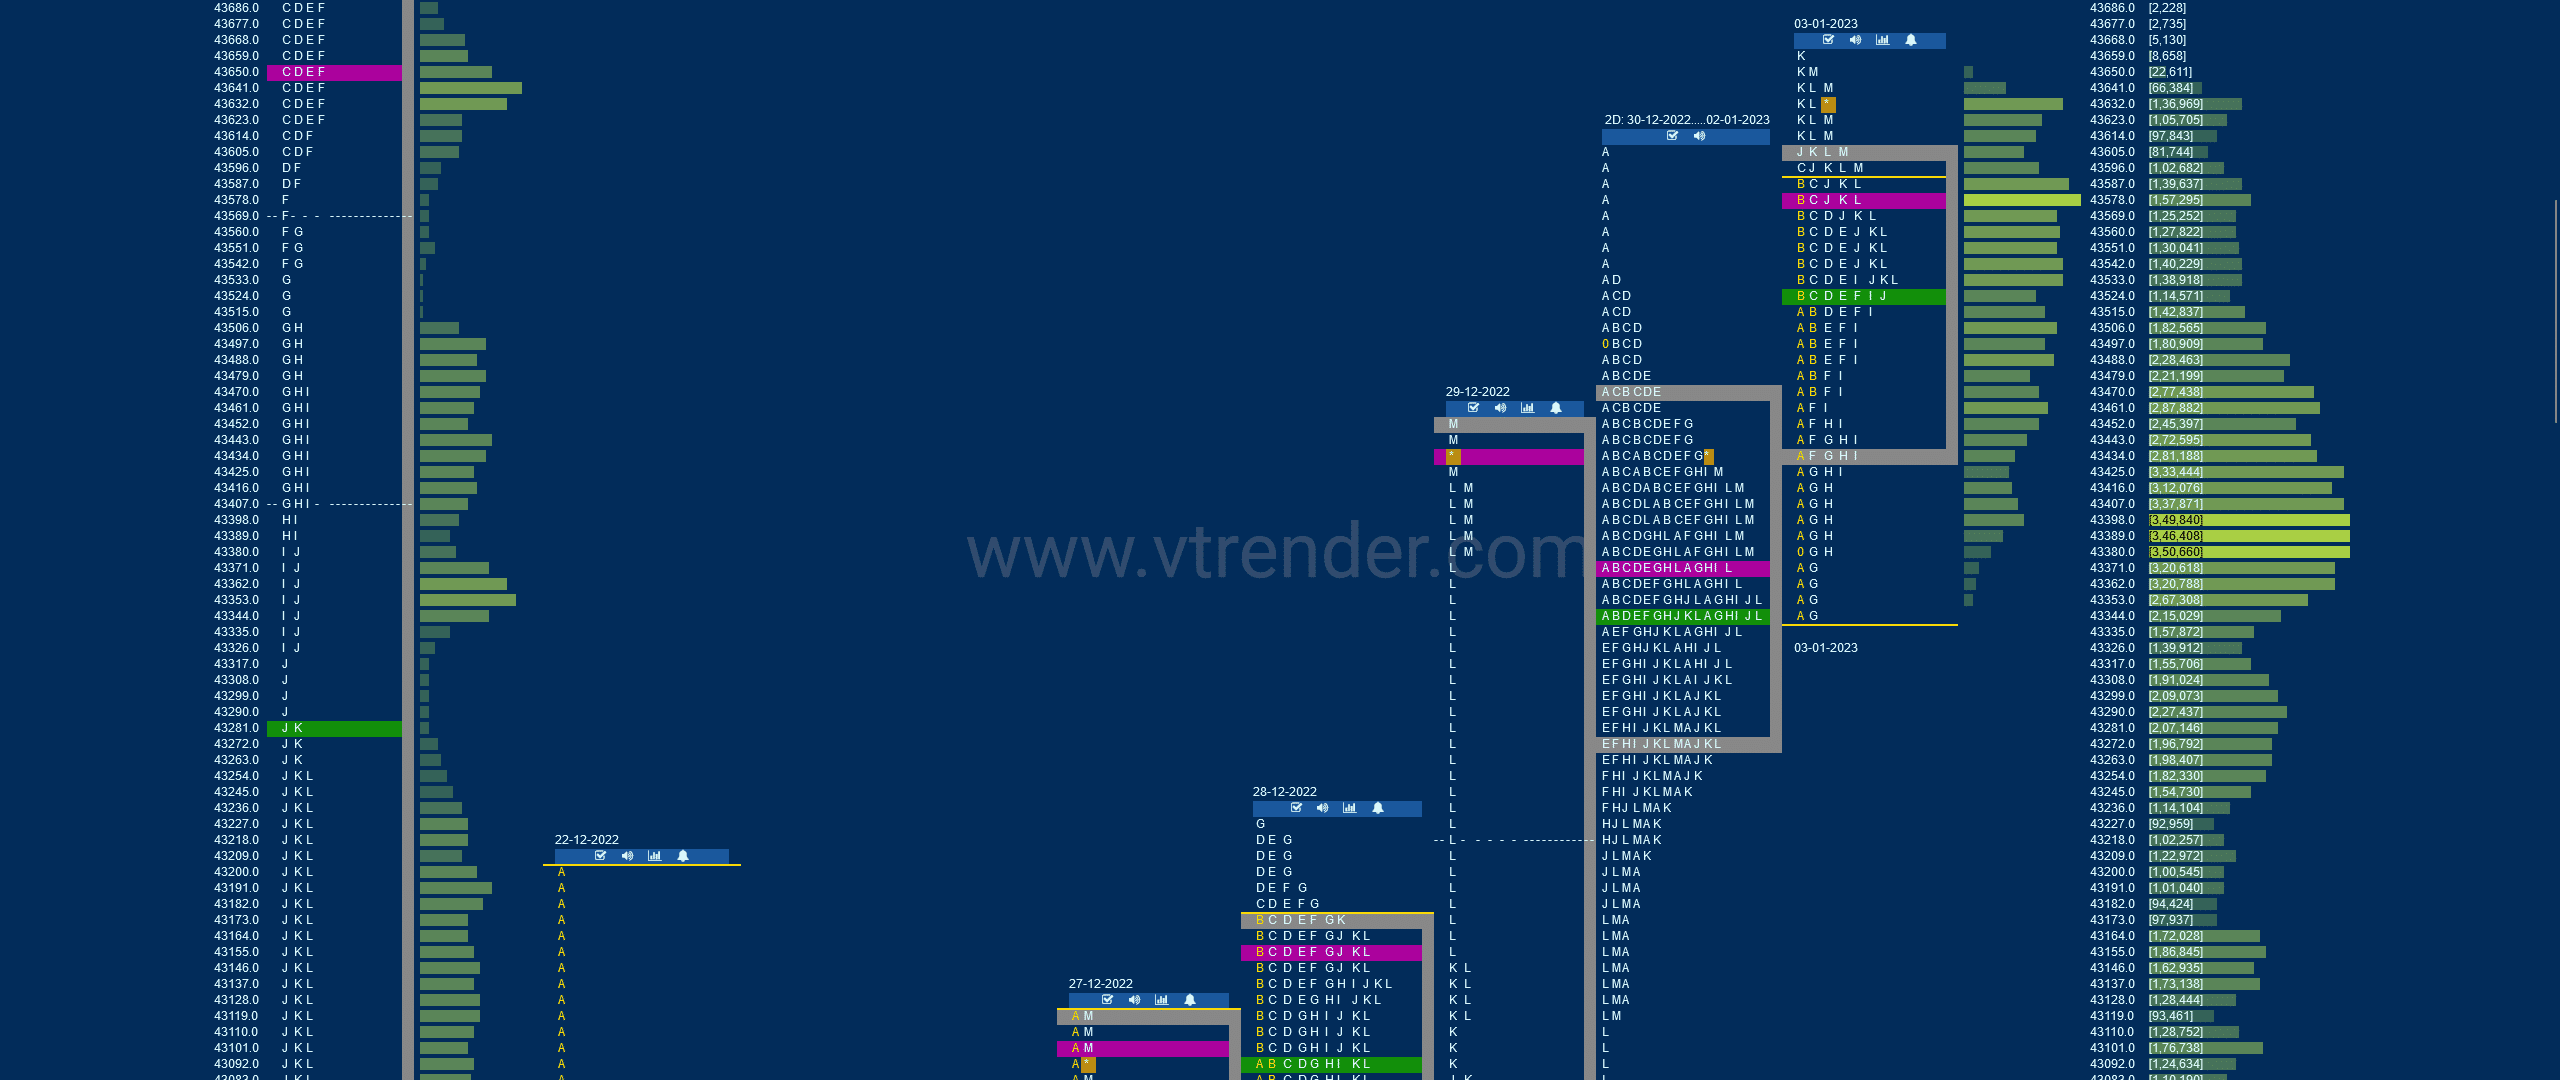 Bnf 1 Market Profile Analysis Dated 03Rd Jan 2023 Banknifty Futures, Charts, Day Trading, Intraday Trading, Intraday Trading Strategies, Market Profile, Market Profile Trading Strategies, Nifty Futures, Order Flow Analysis, Support And Resistance, Technical Analysis, Trading Strategies, Volume Profile Trading